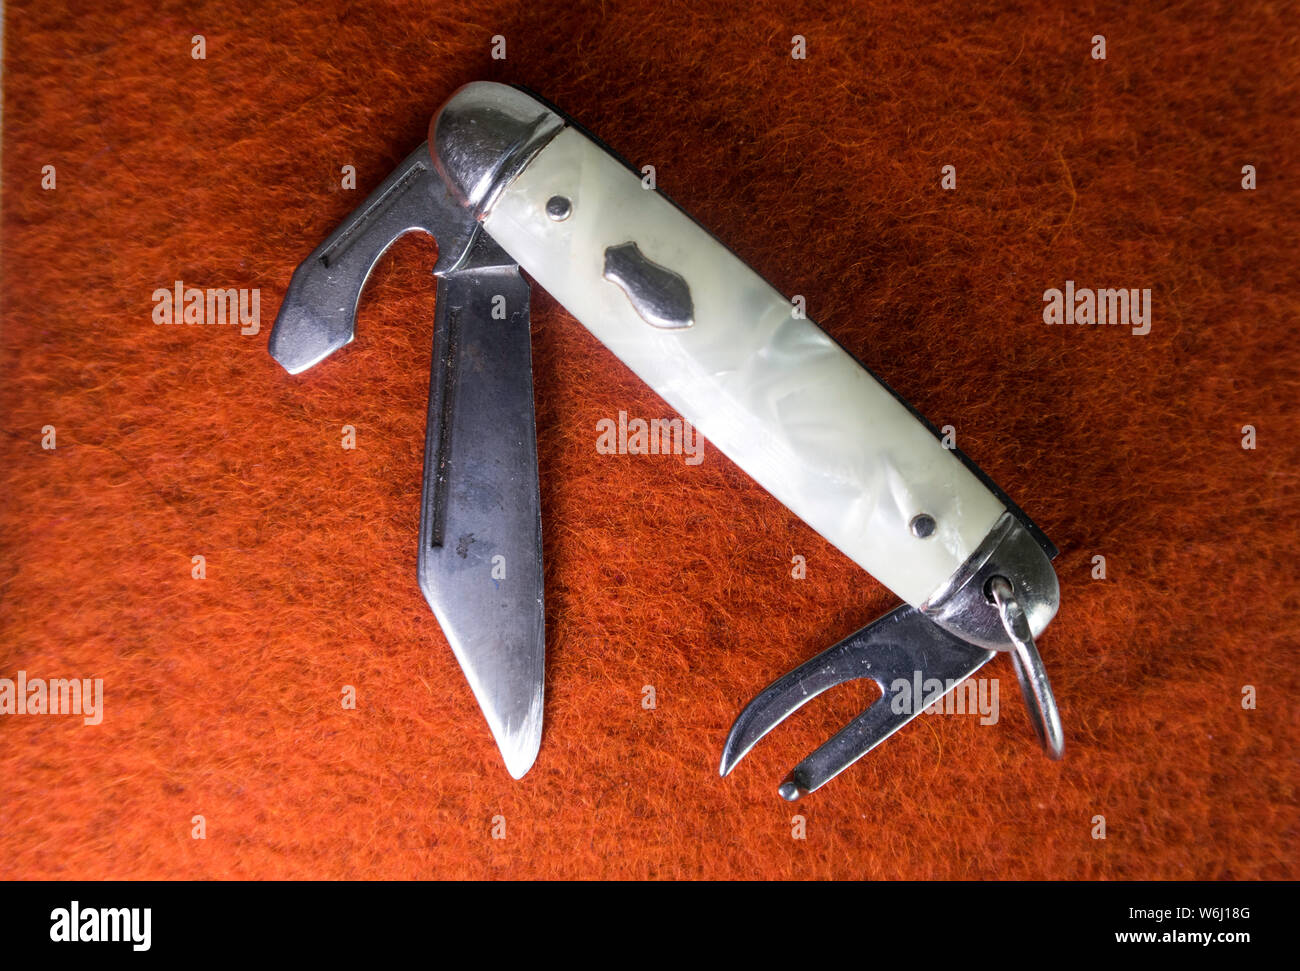 https://c8.alamy.com/comp/W6J18G/victorian-joseph-beal-and-sons-miniature-mother-of-pearl-knife-W6J18G.jpg